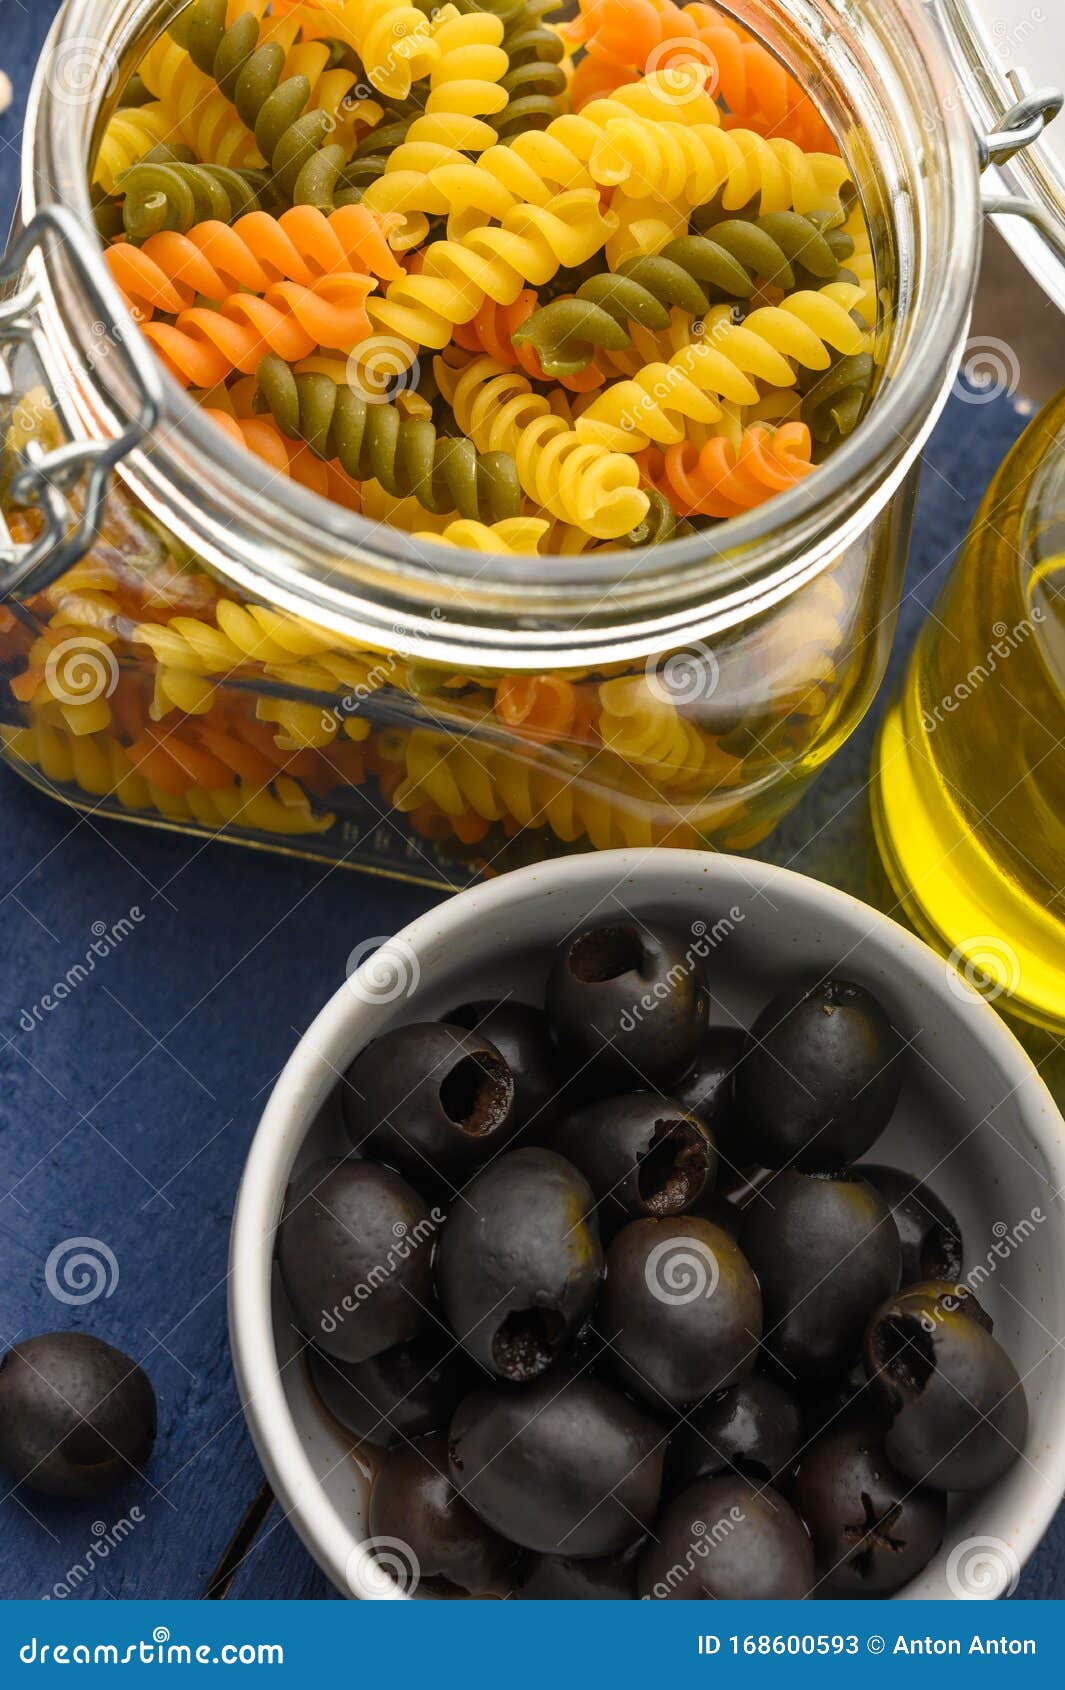 Italian Or Greek Olive Oil With Spaghetti Or Pasta And Olives Vertical Frame Stock Image Image Of Diet Oily 168600593,Sauteed Mushrooms